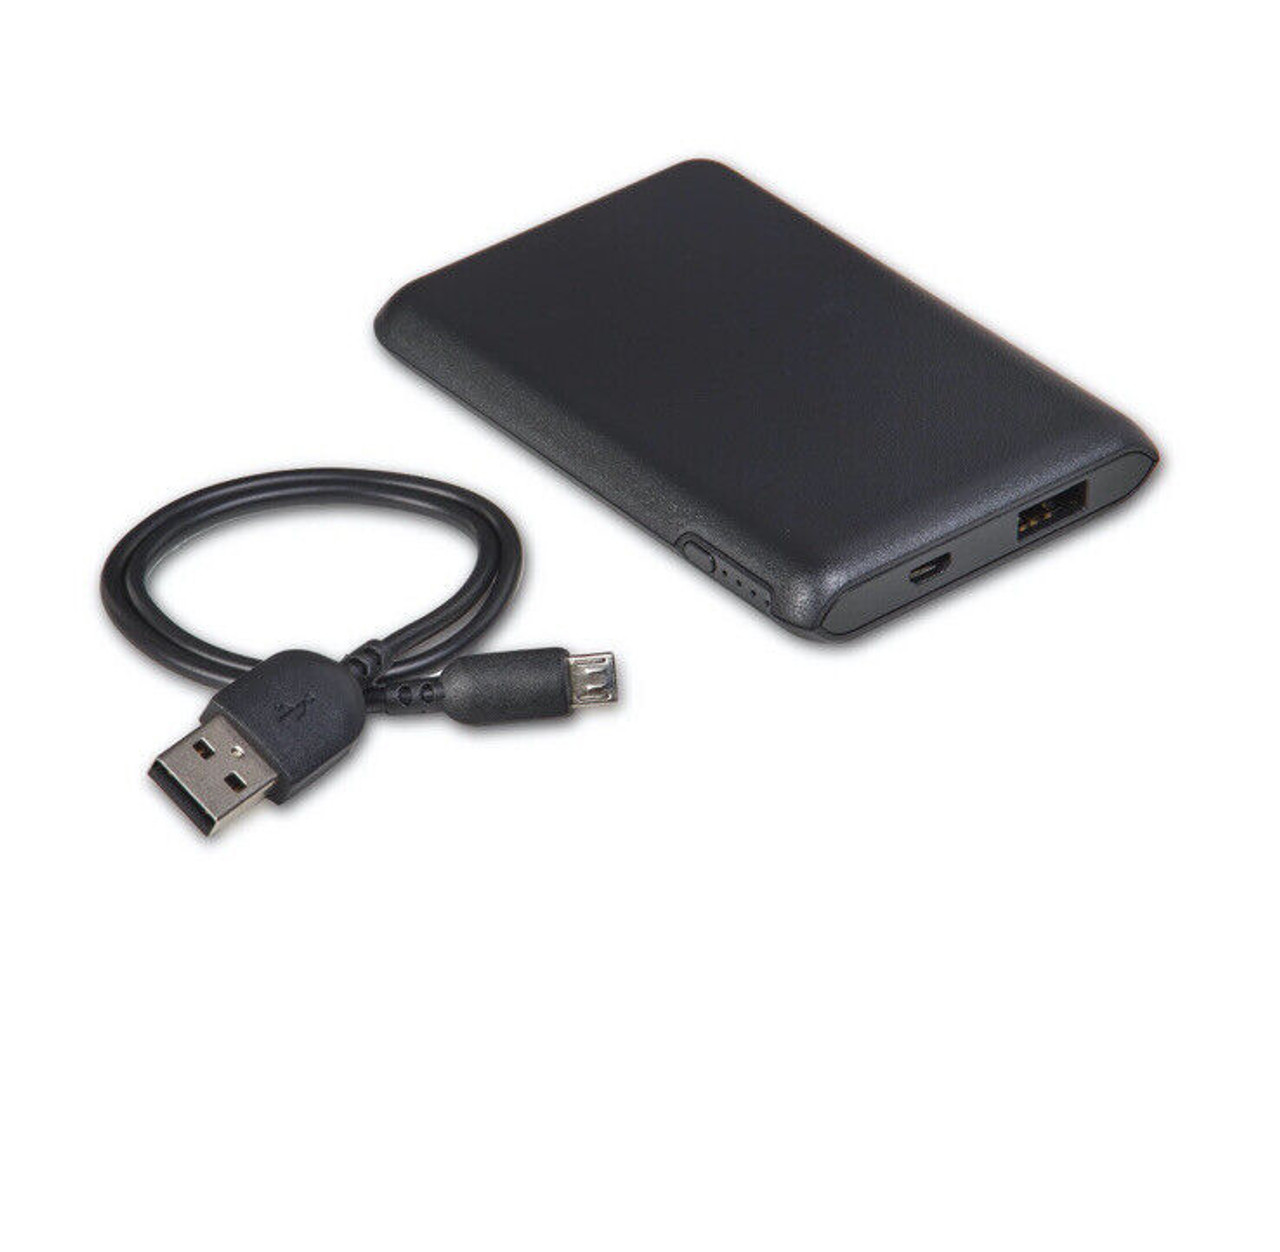 Portable battery for smartphones, tablets, and other USB-charged devices